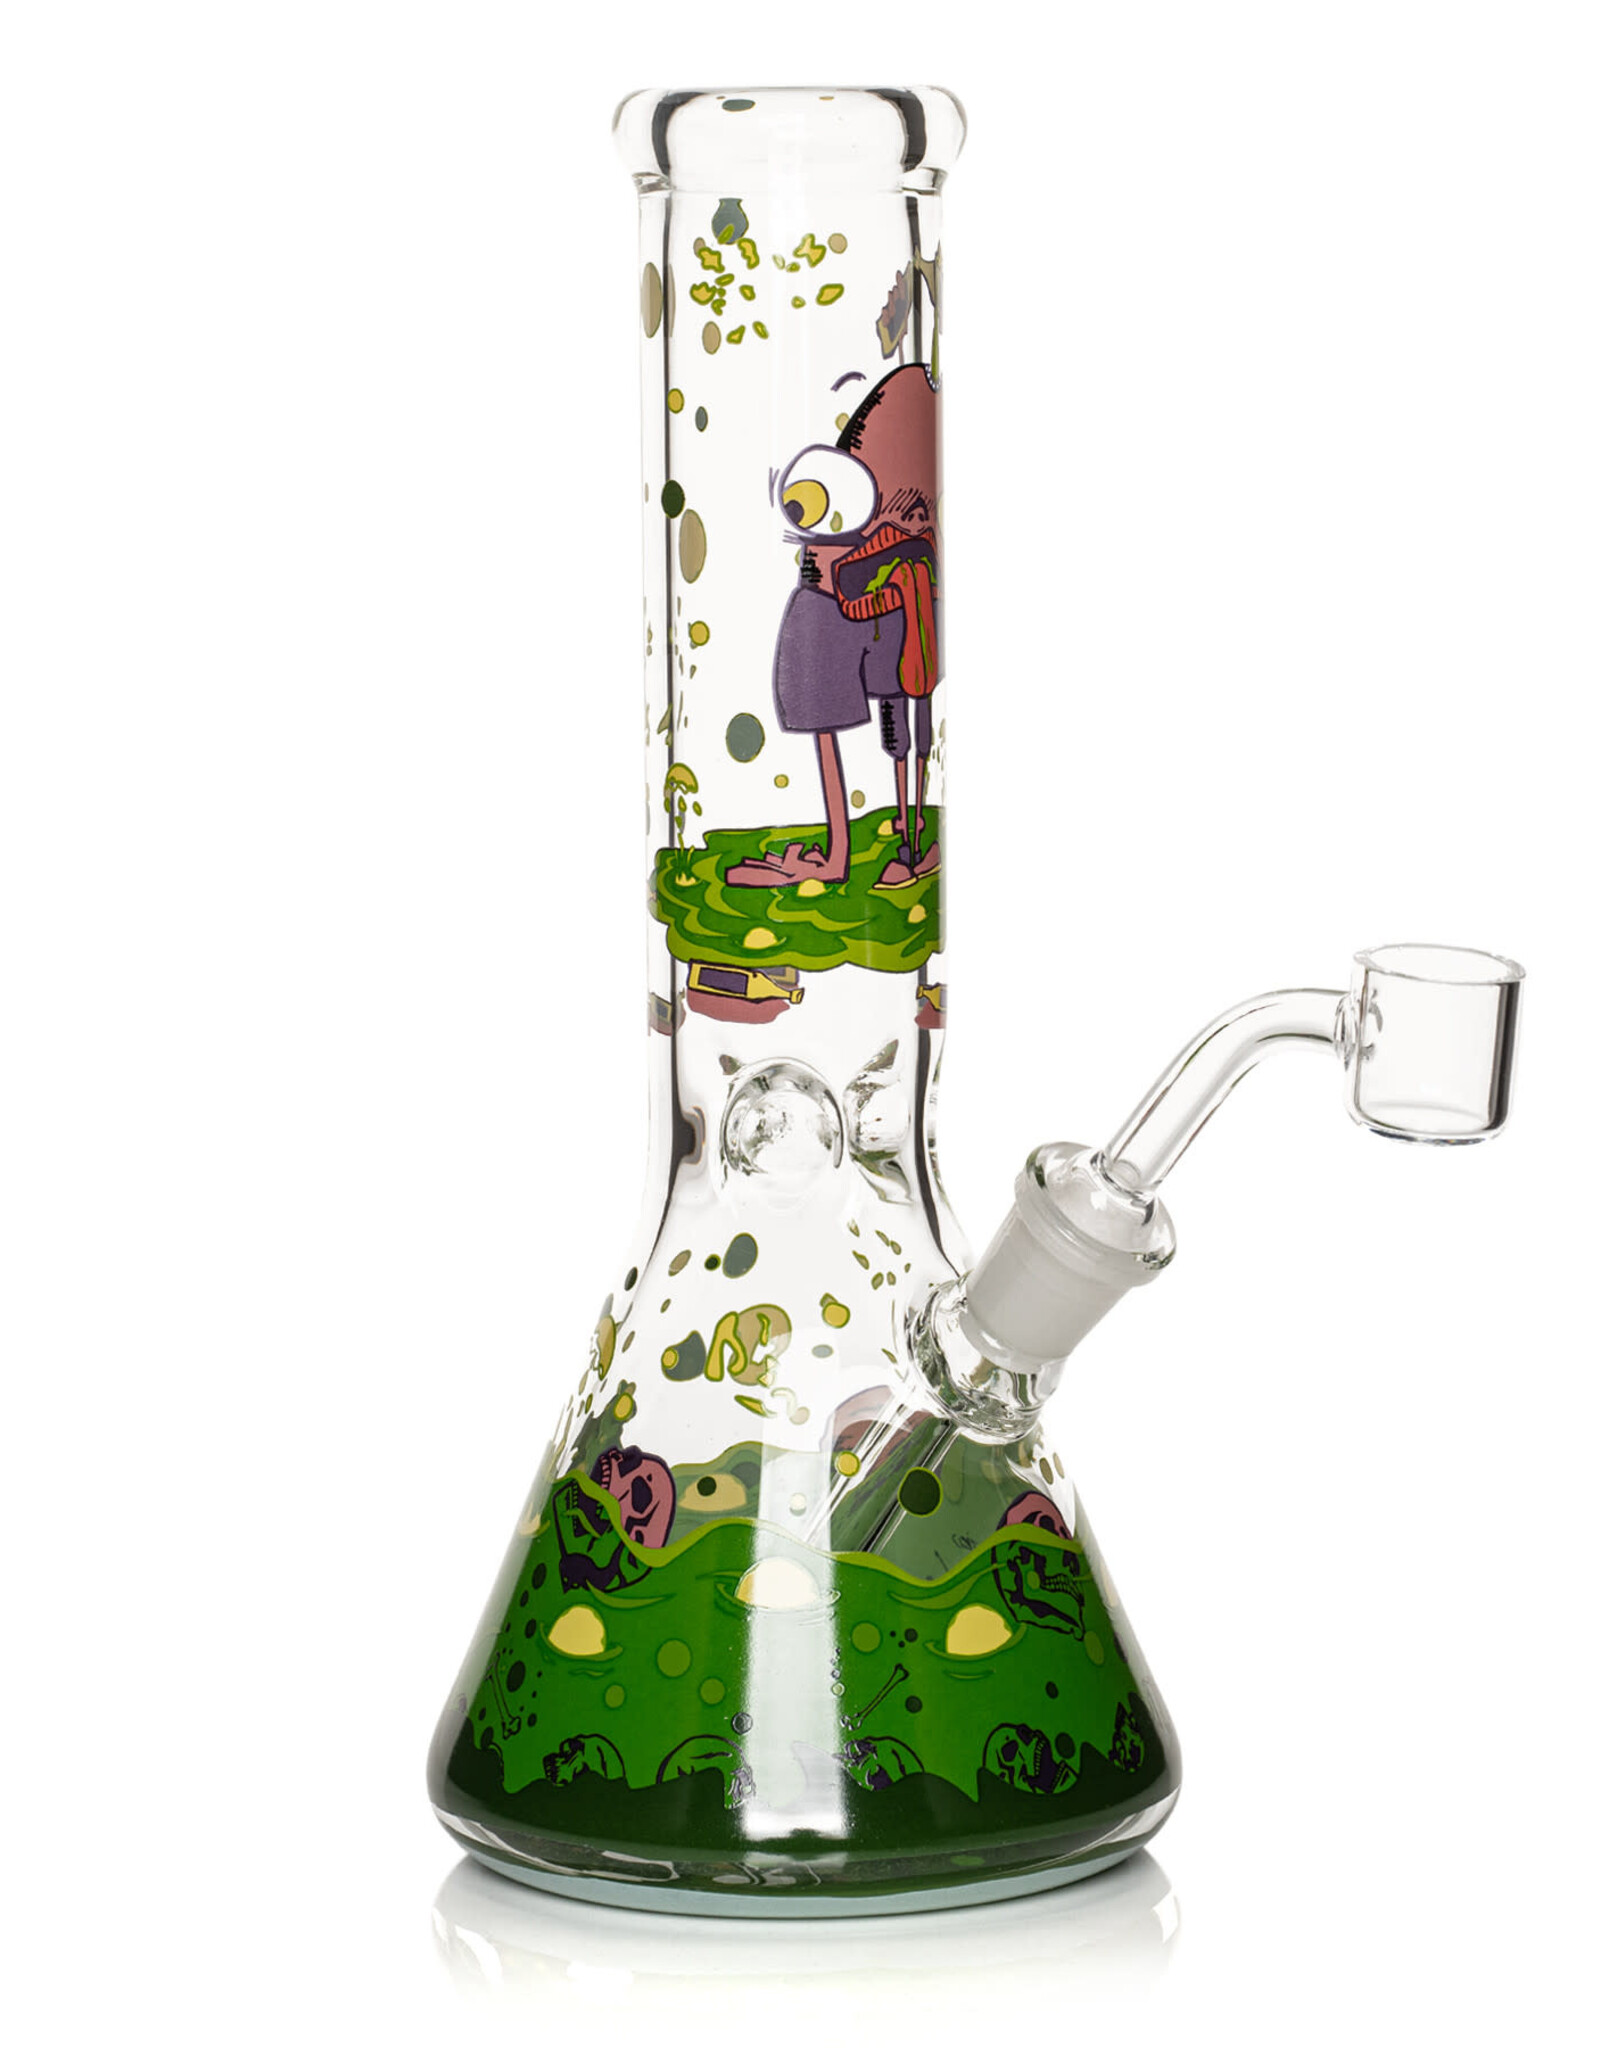 West Coast Gifts REG113 8.5" Acid Bath Concentrate Rig (Limited Edition)